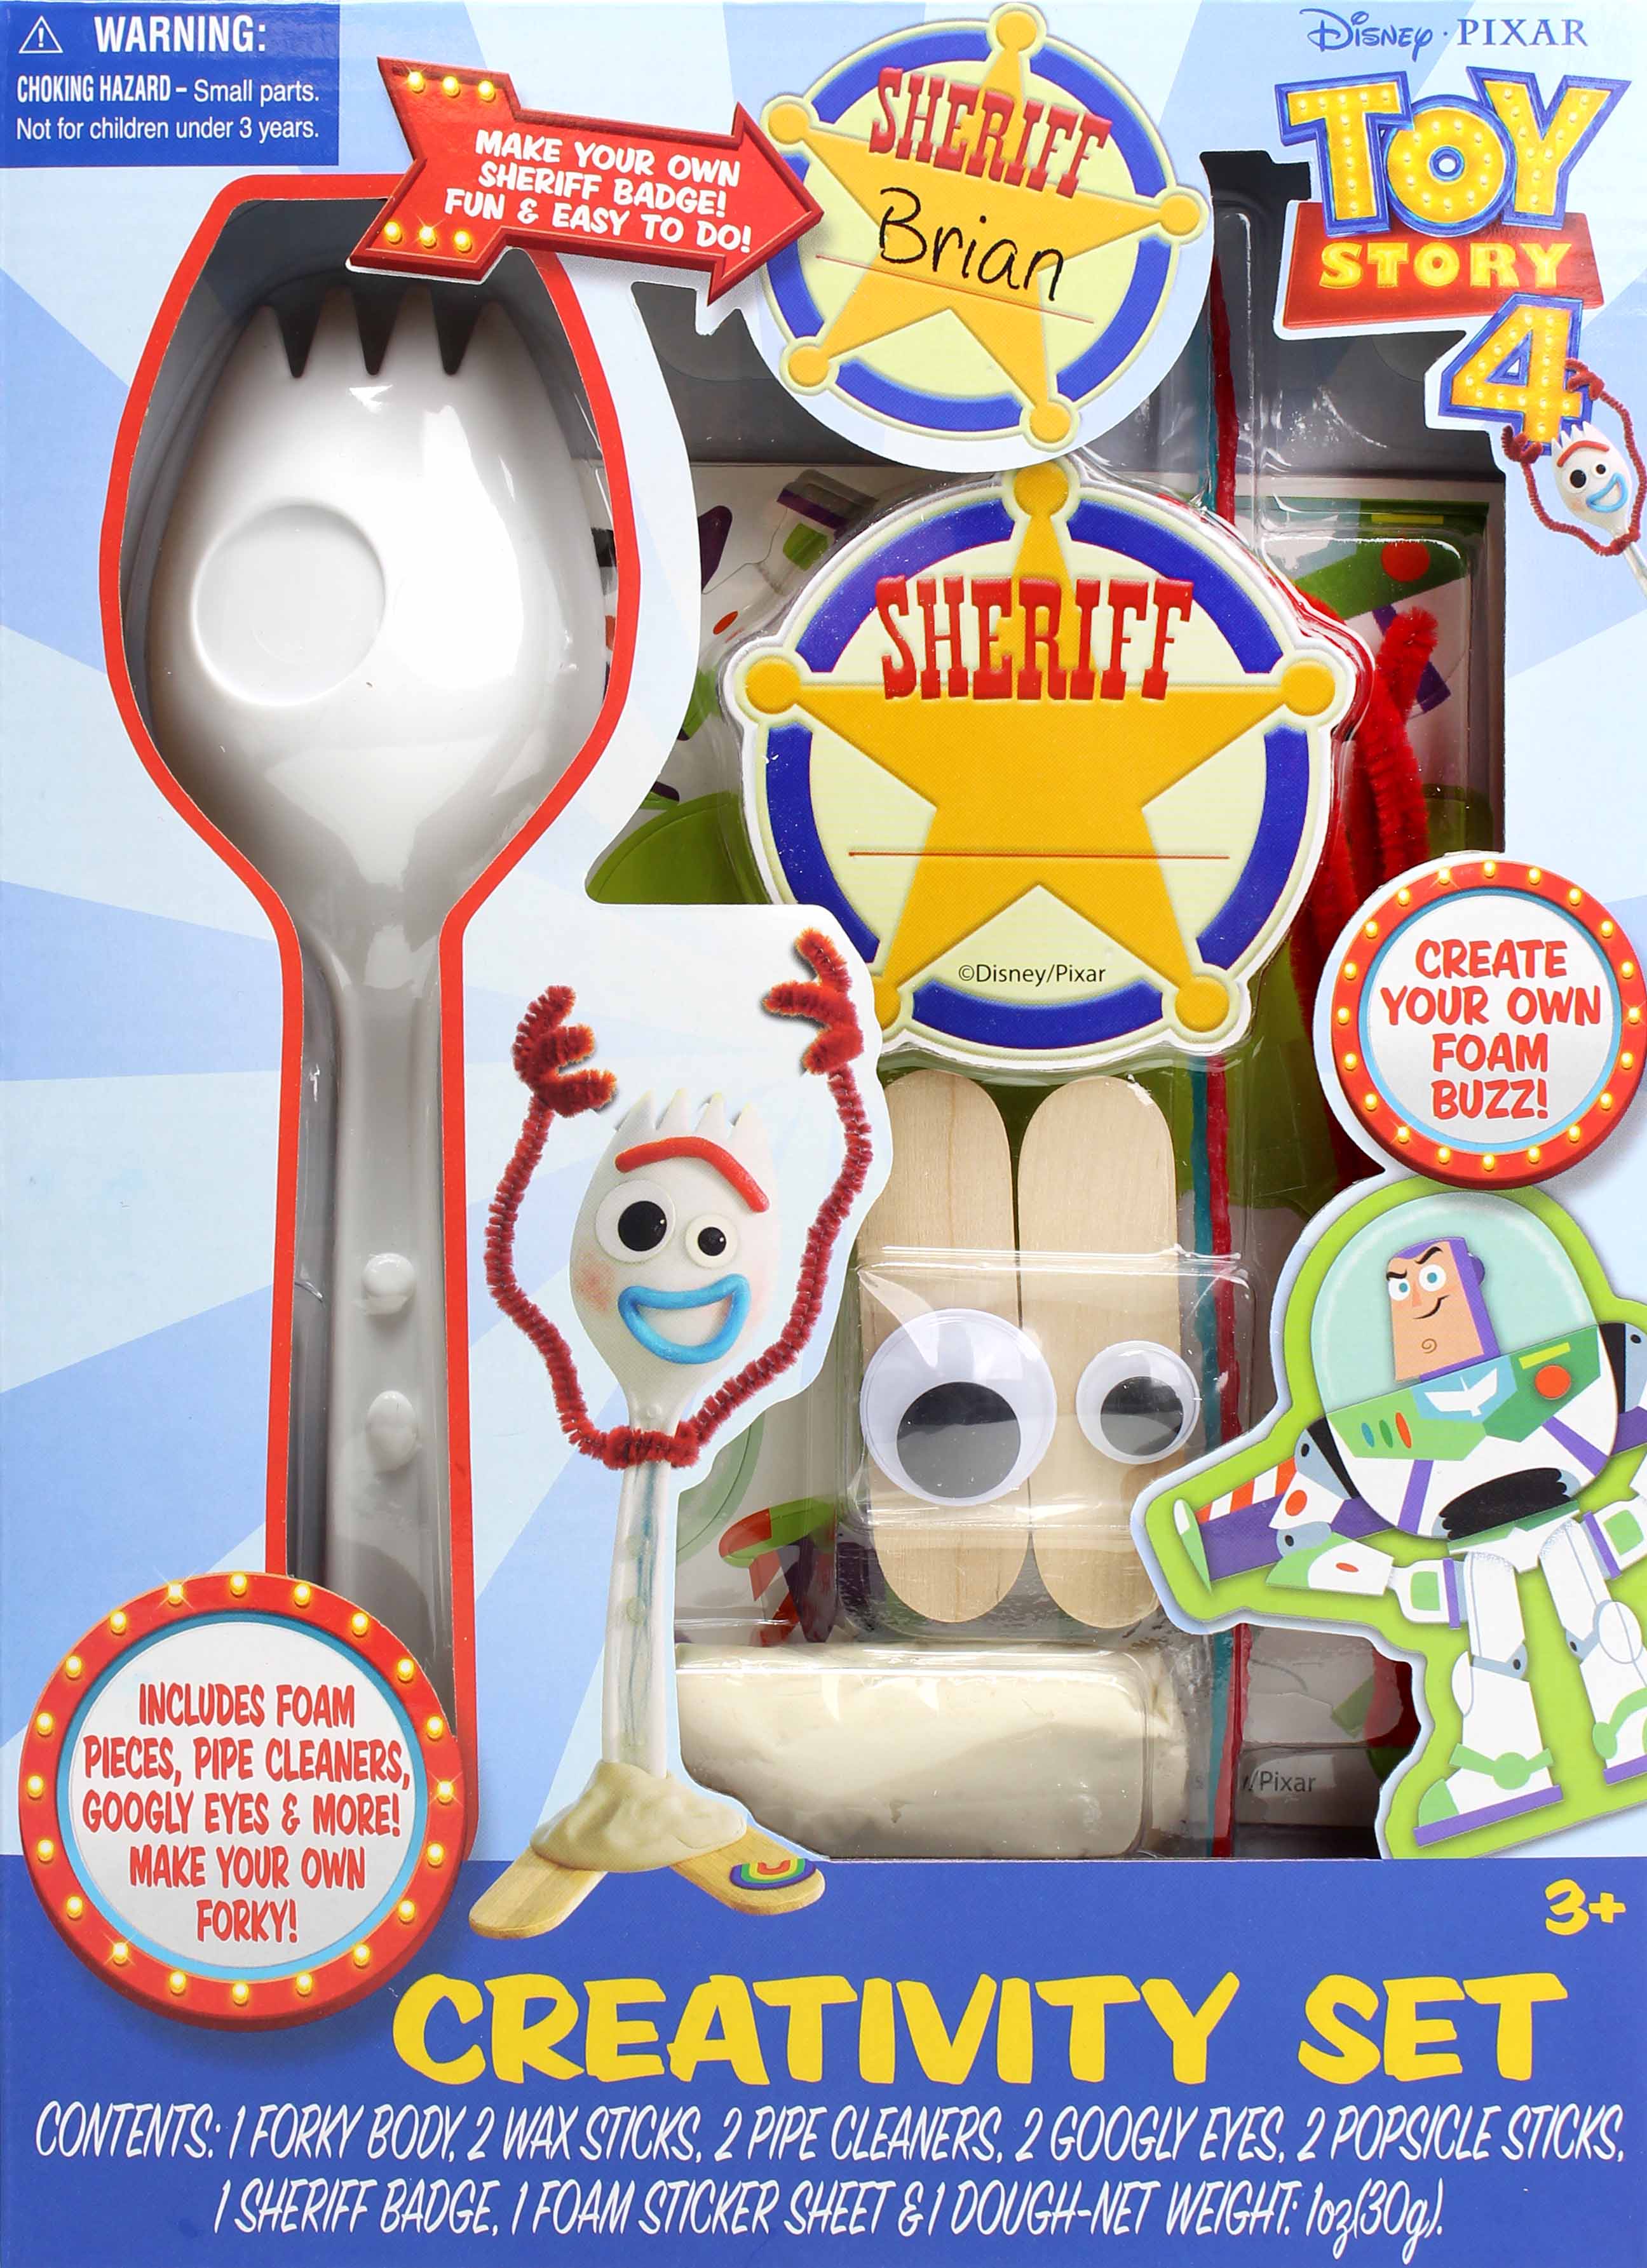 Toy Story 4 Craft Creativity Art Set: Make Your Own Forky and Other Characters, Gift for Kids, Ages 3+ - image 1 of 4